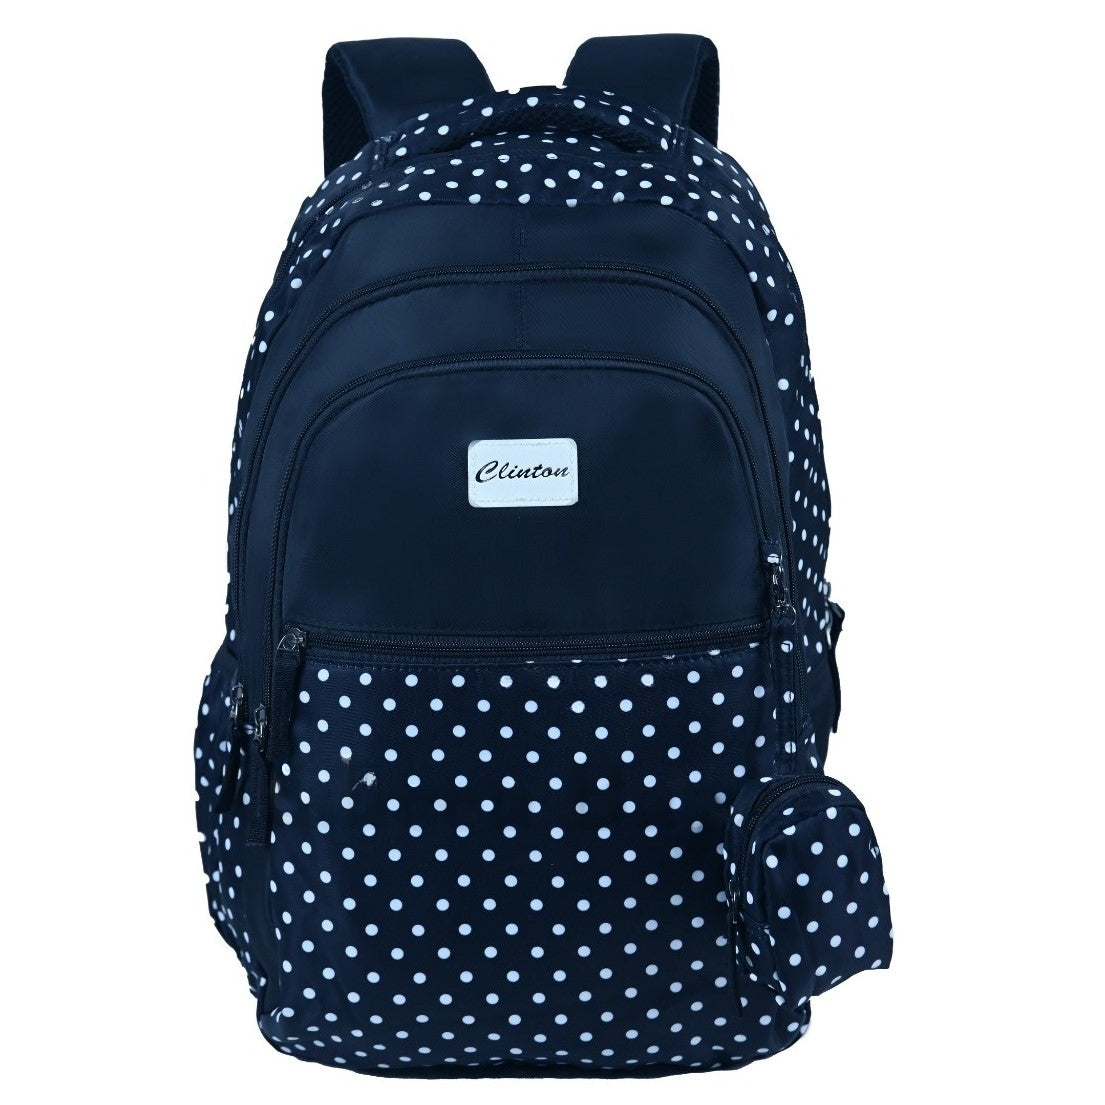 Buy 1 Get 1 Free | Multi Zipper Espiral Polka Dotted Backpack Bag with Pouch